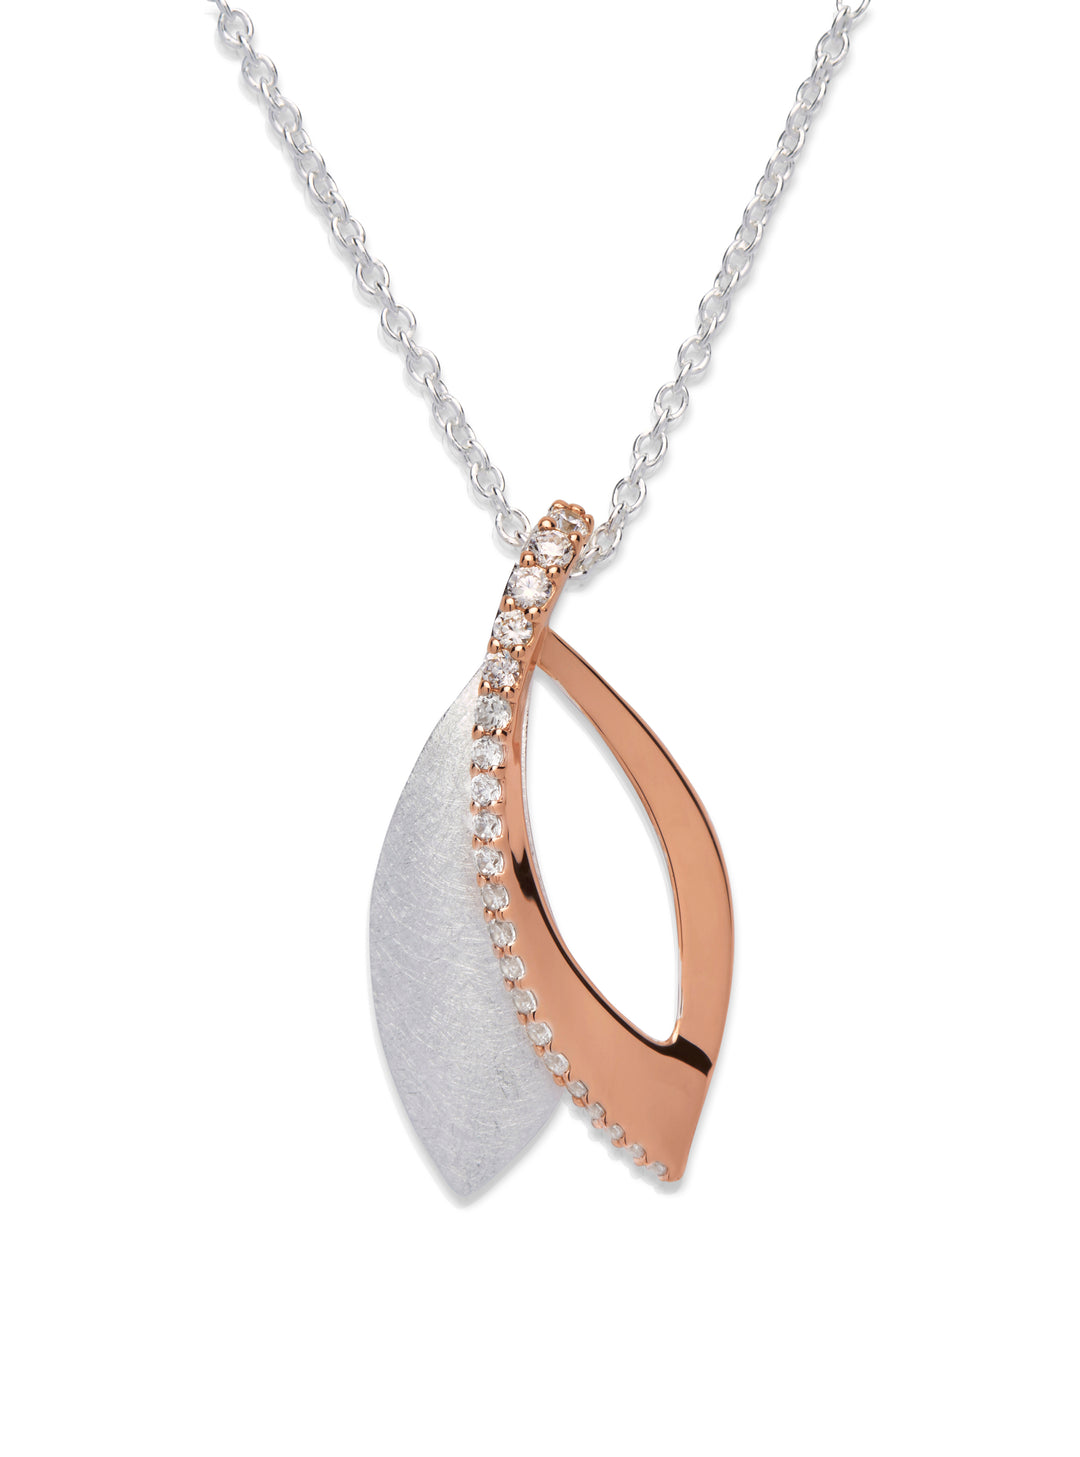 Sterling Silver and Rose Gold Plate CZ Eliptic Pendant and Chain